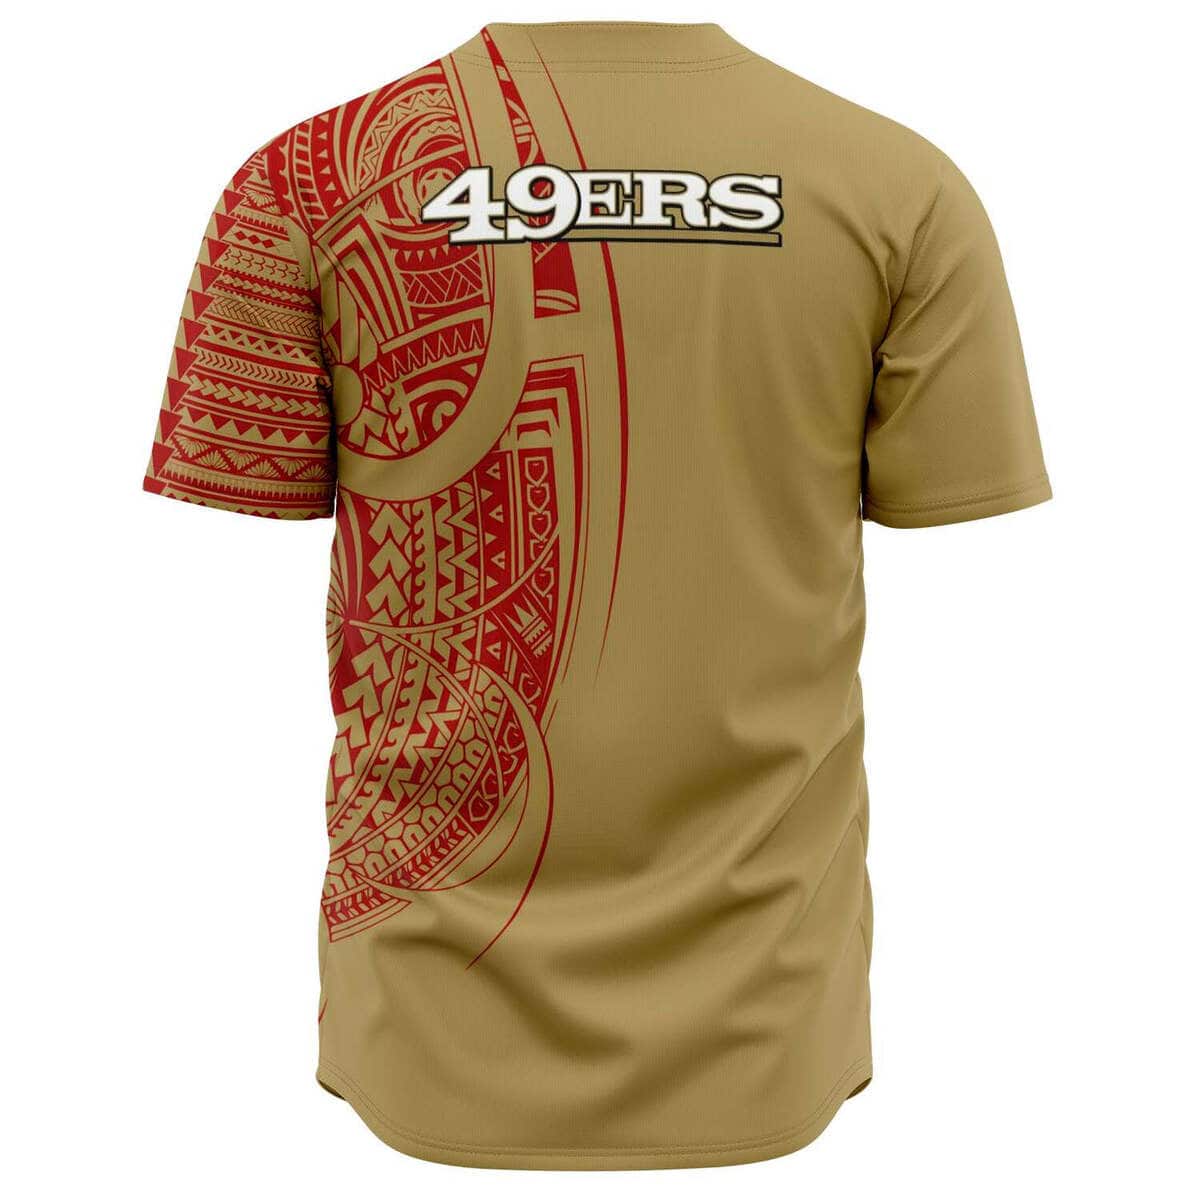 San Francisco 49ers Baseball Jersey Polynesian Gift For Sporty Friends